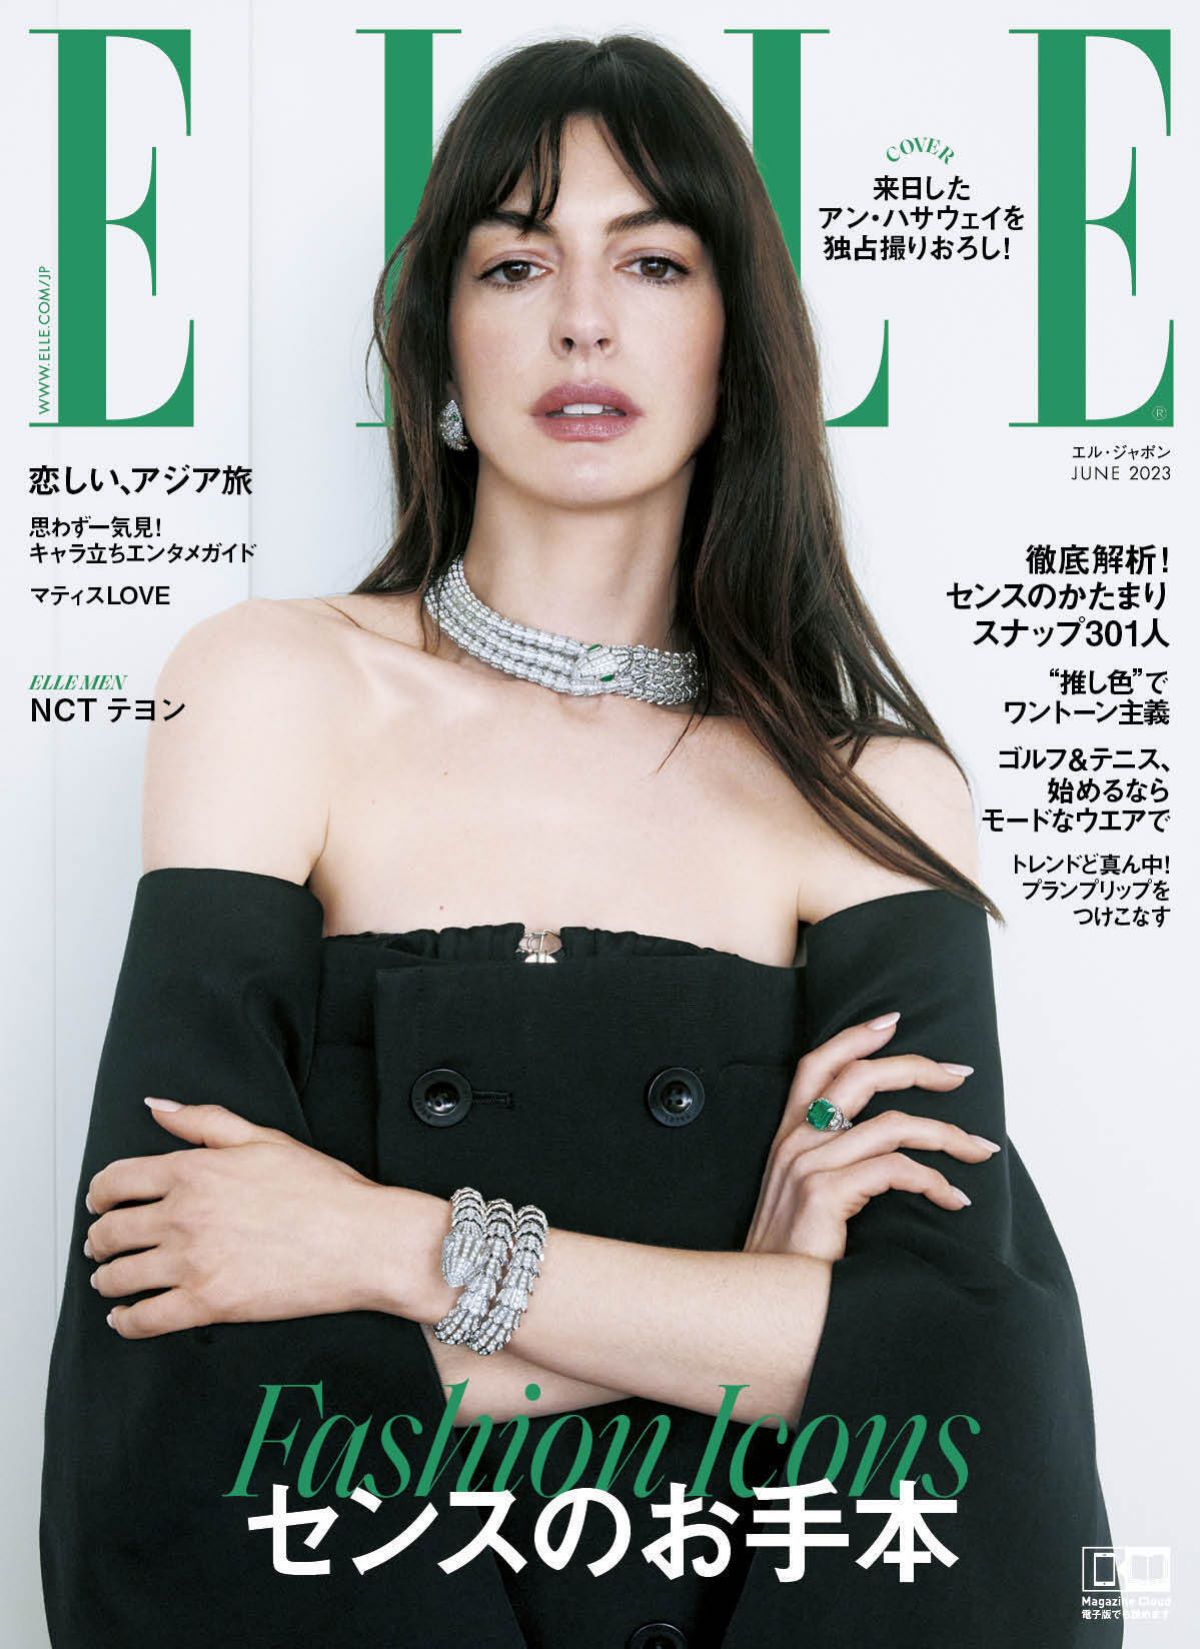 Anne Hathaway On The Cover Of Elle Magazine Japan June 2023 0 